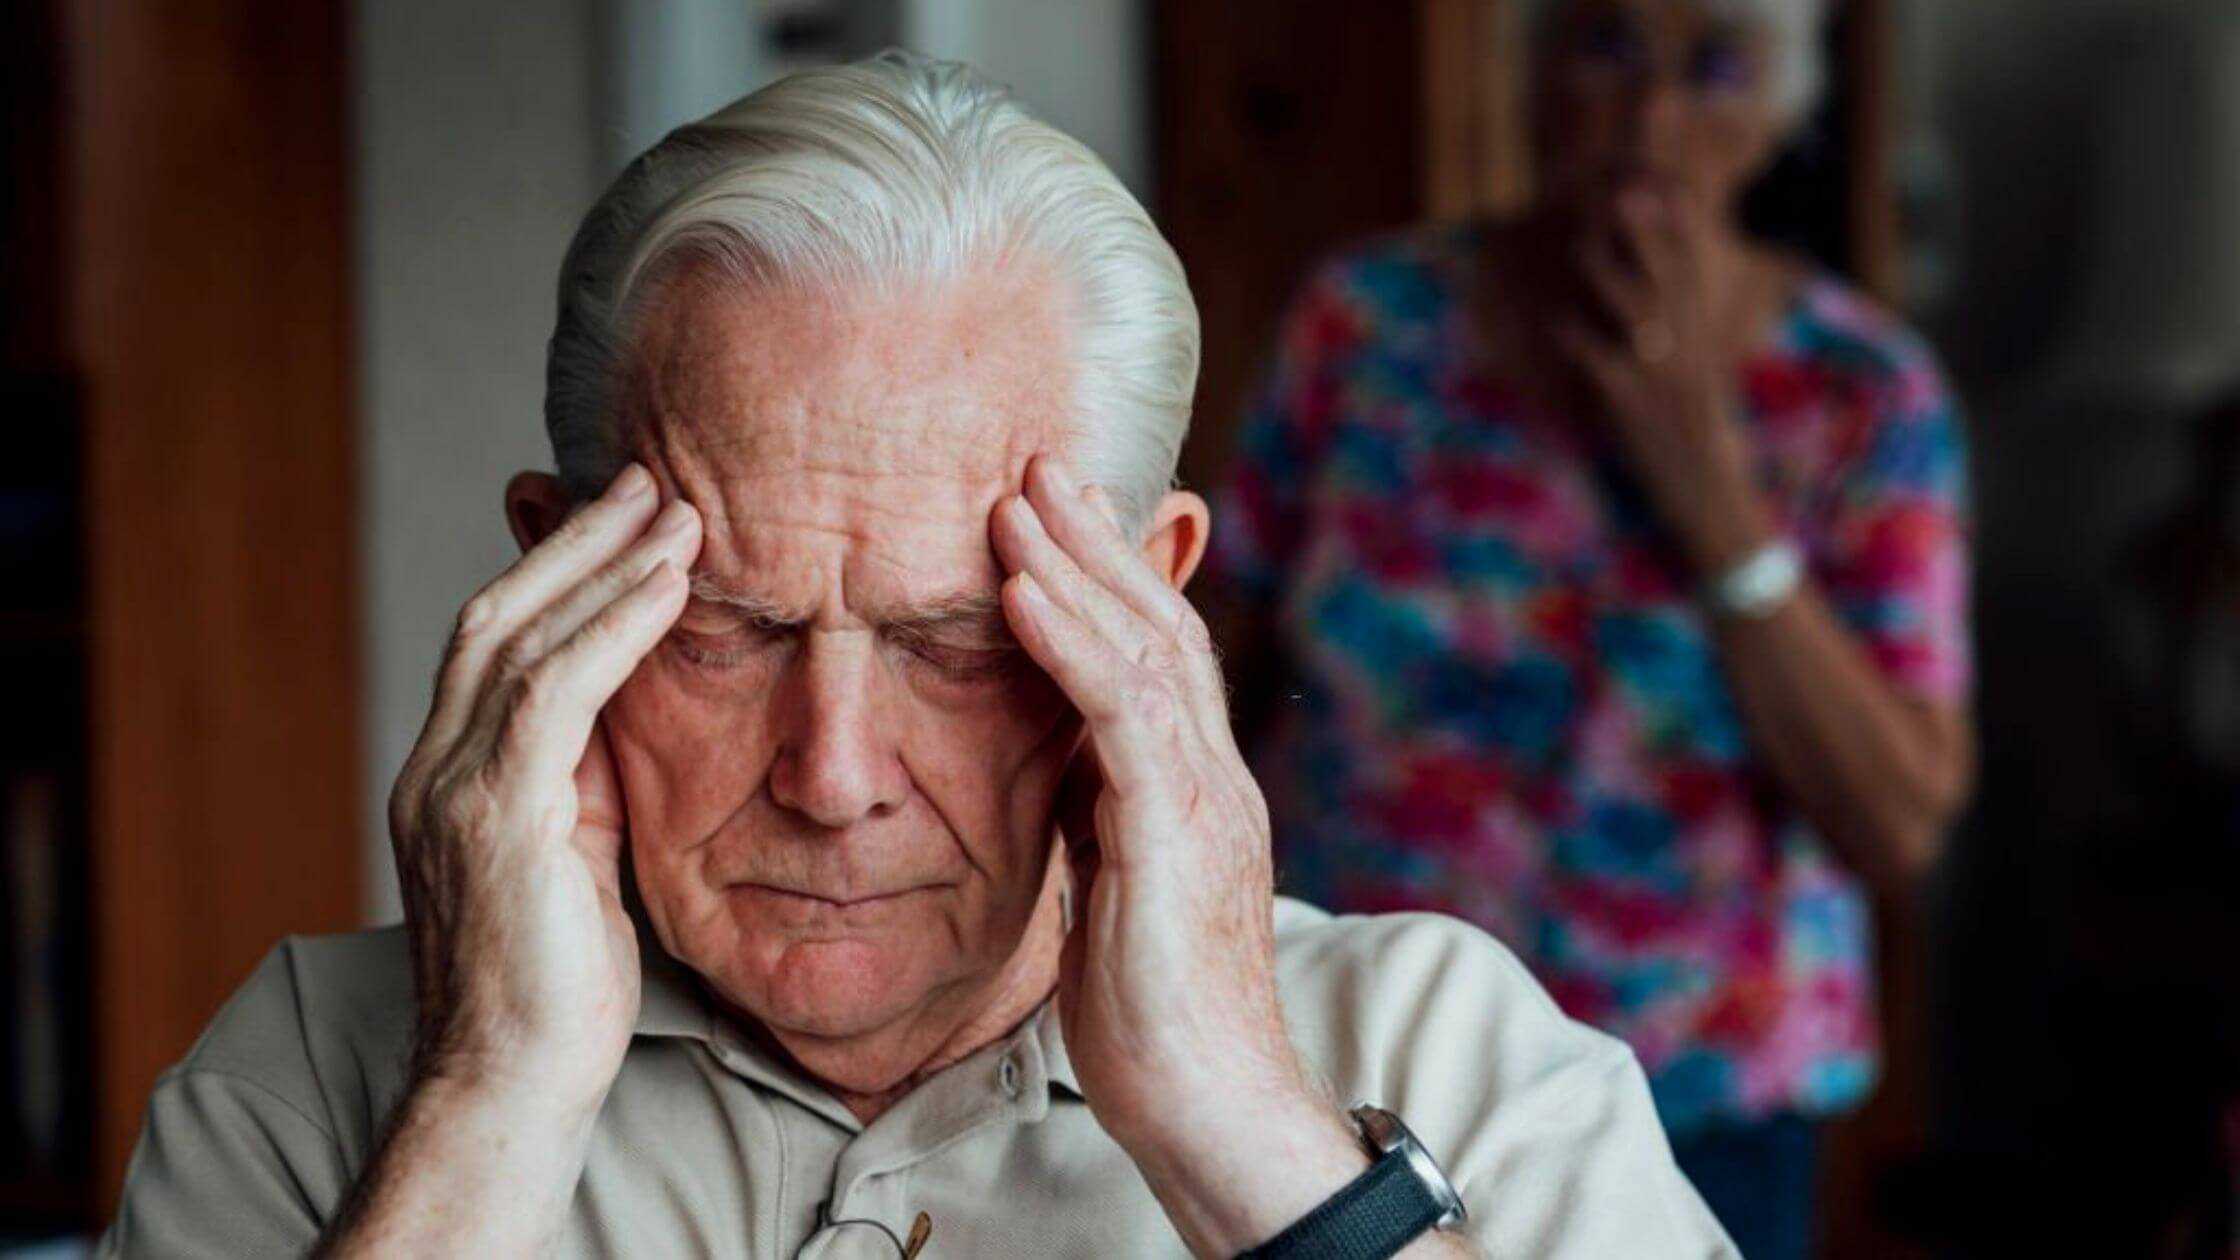 Symptoms Of Dementia May Appear Decades Before Patients Are Even Diagnosed
